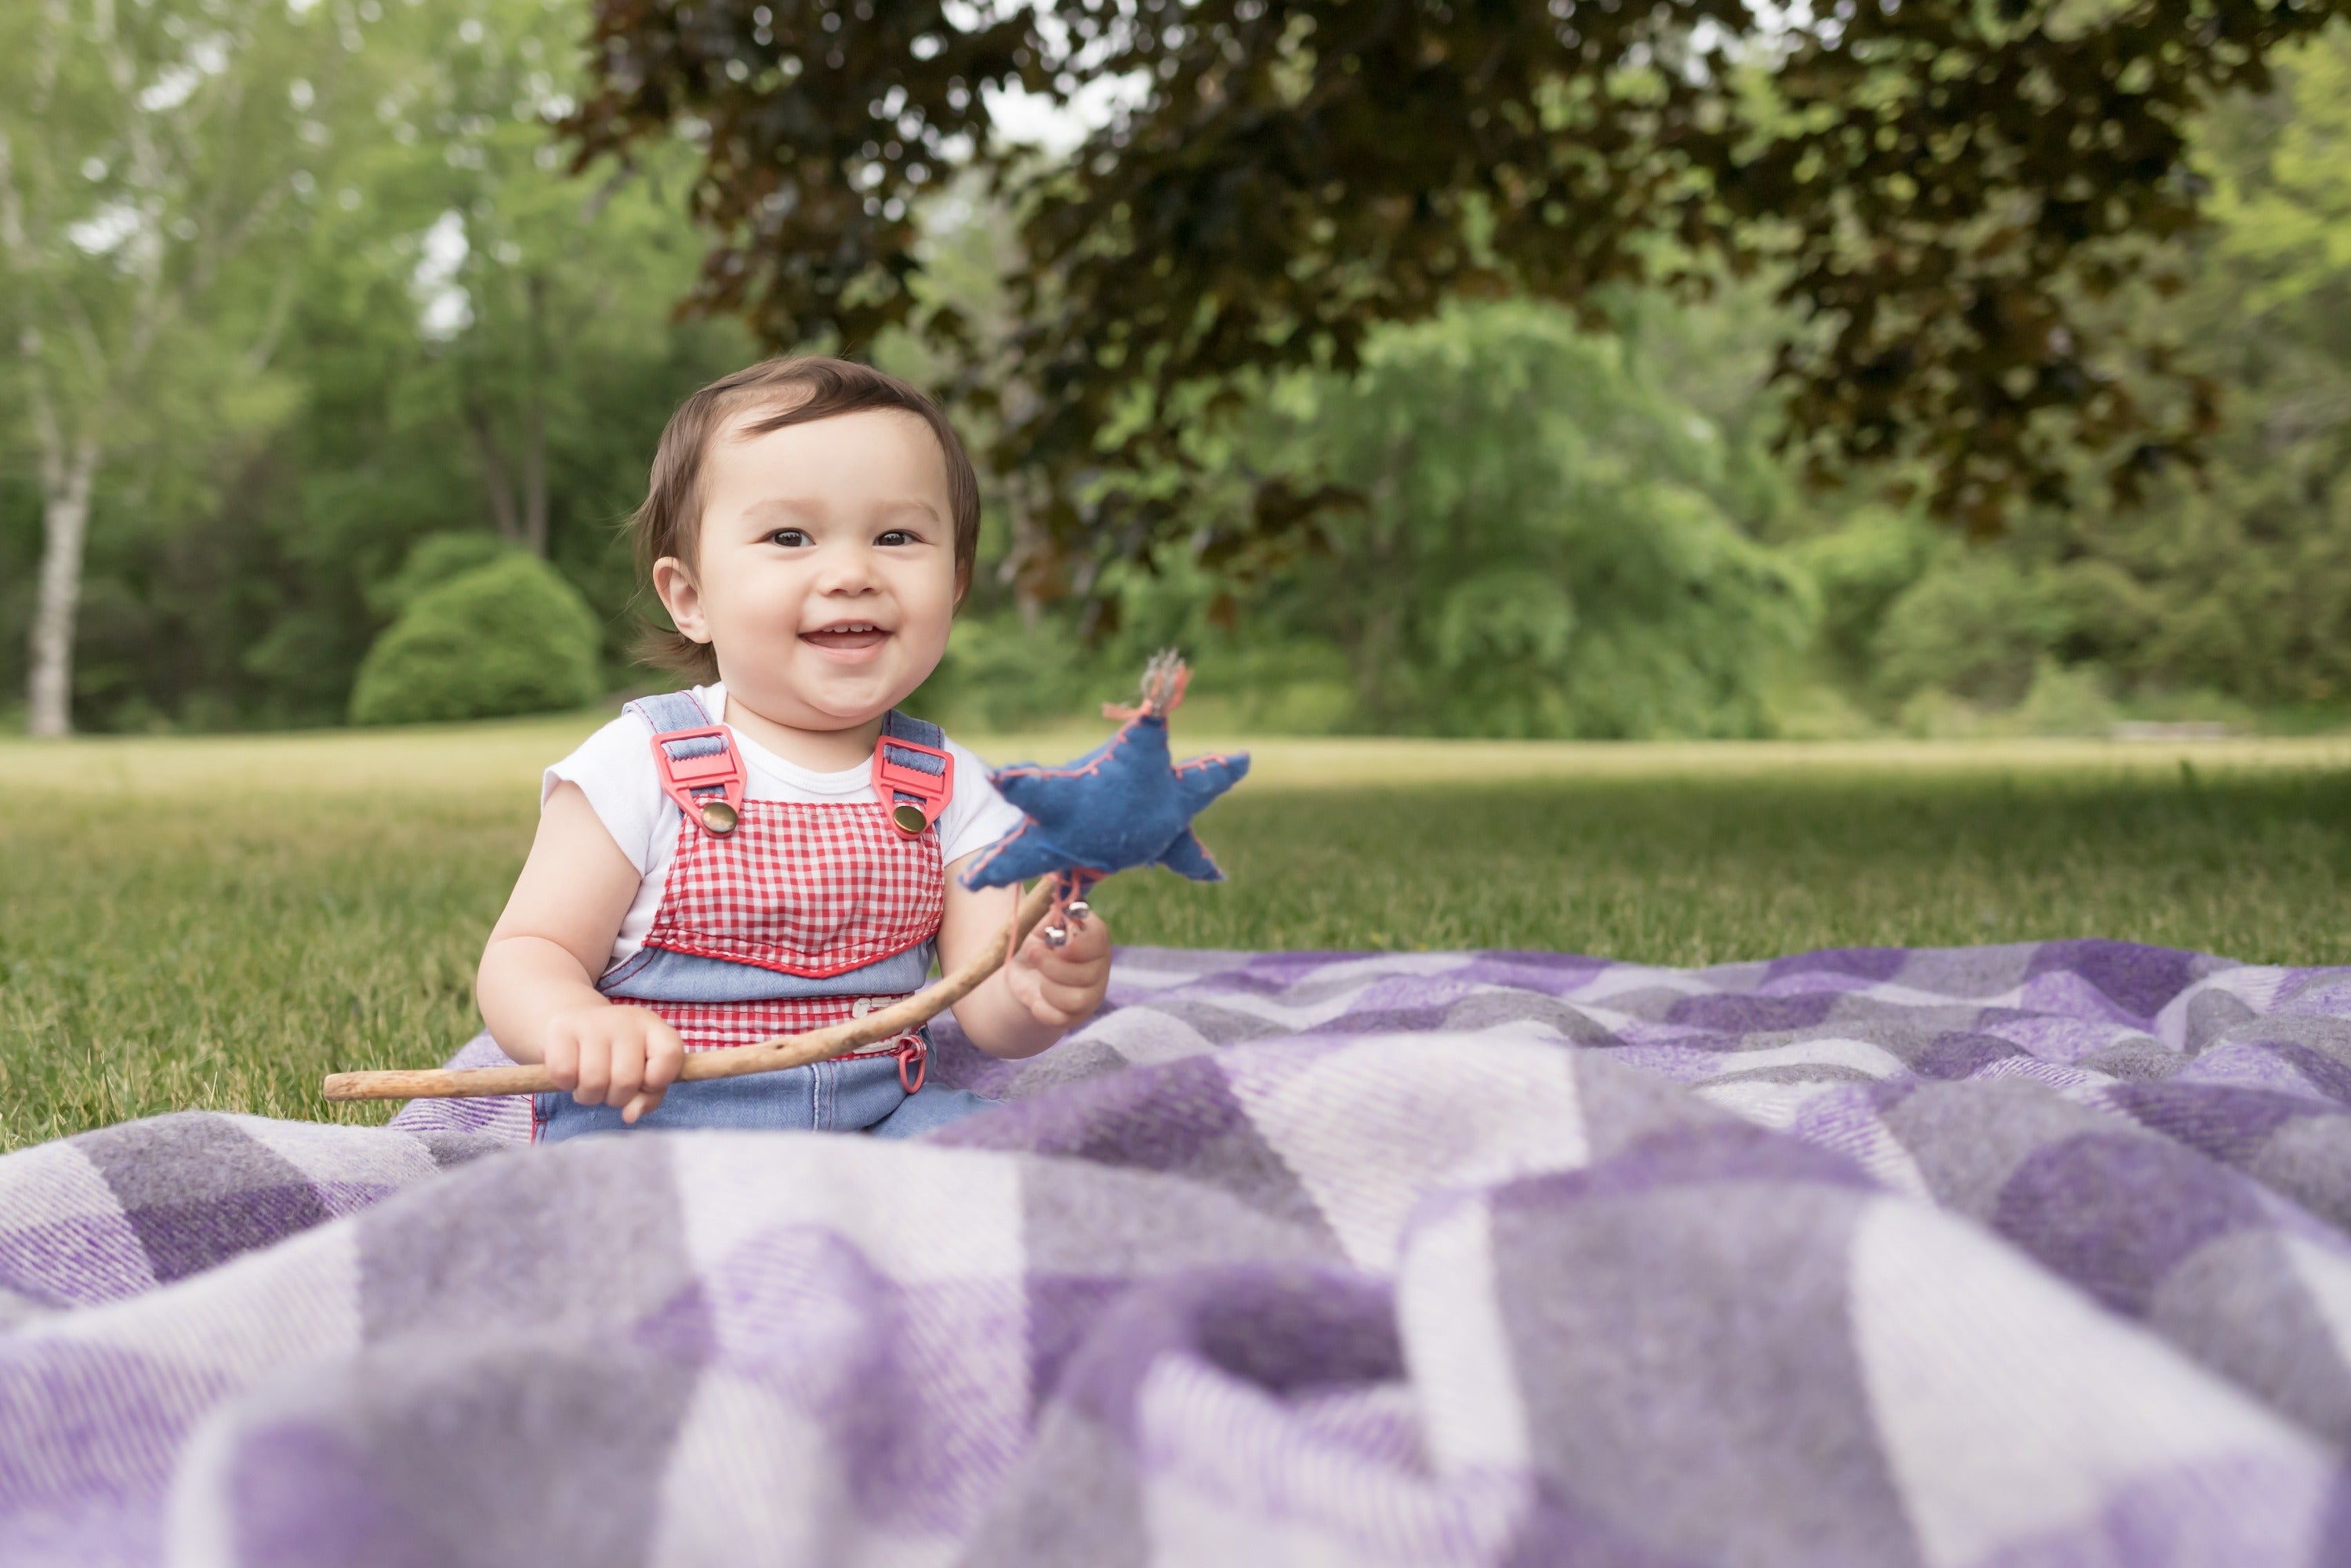 Smiling dark haired toddler waving a star wand, sitting on a purple checkerboard Topsy Farms' blanket on a green lawn under a tree